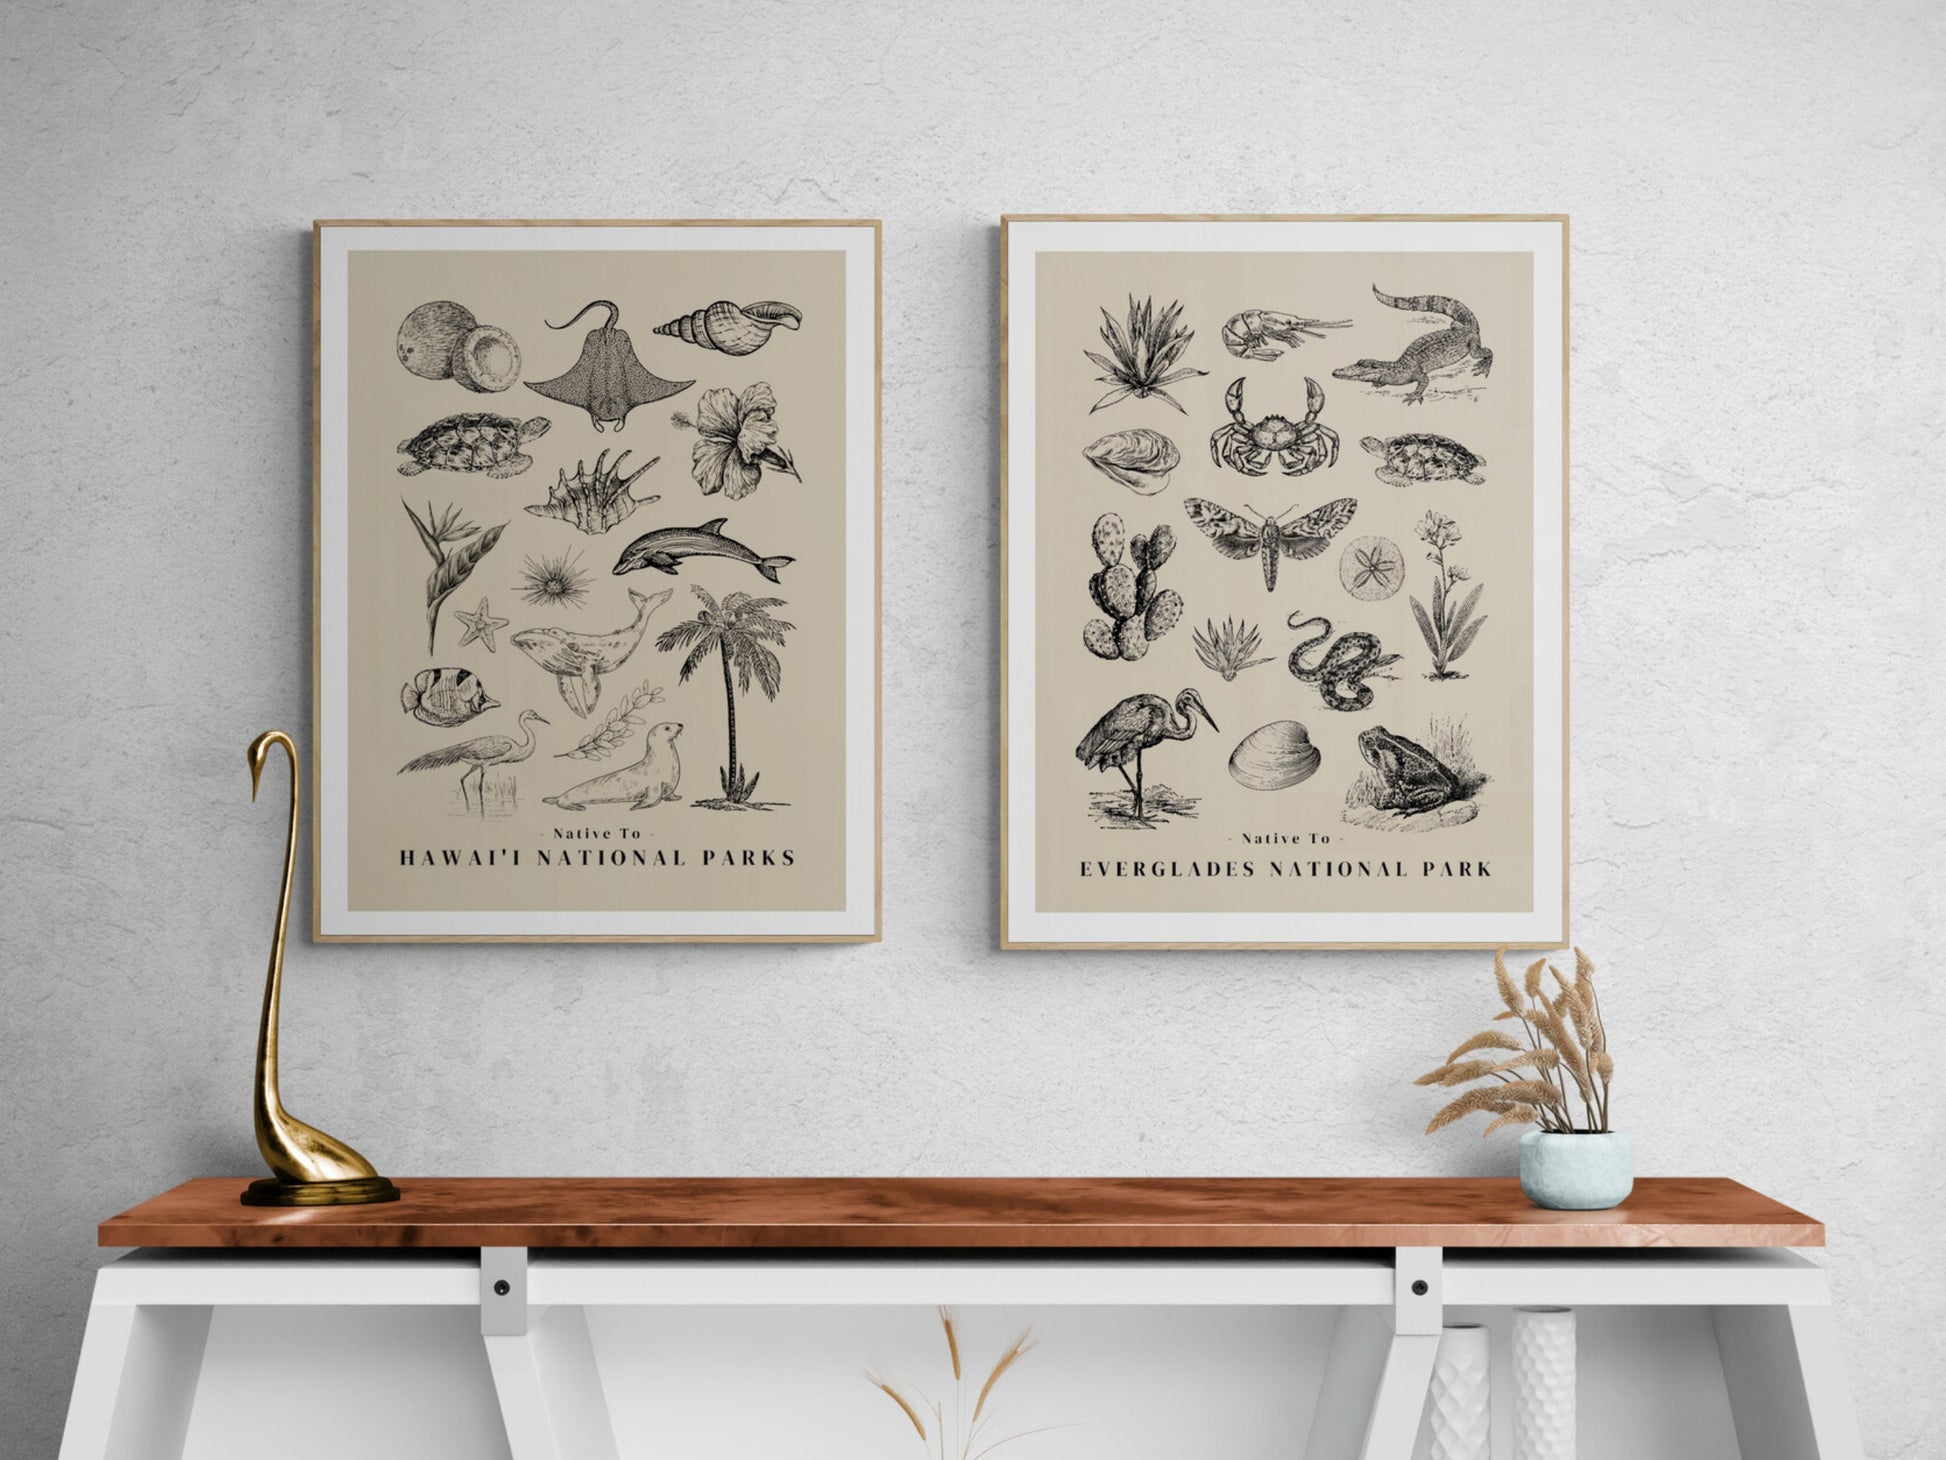 Native to the Everglades National Park Poster